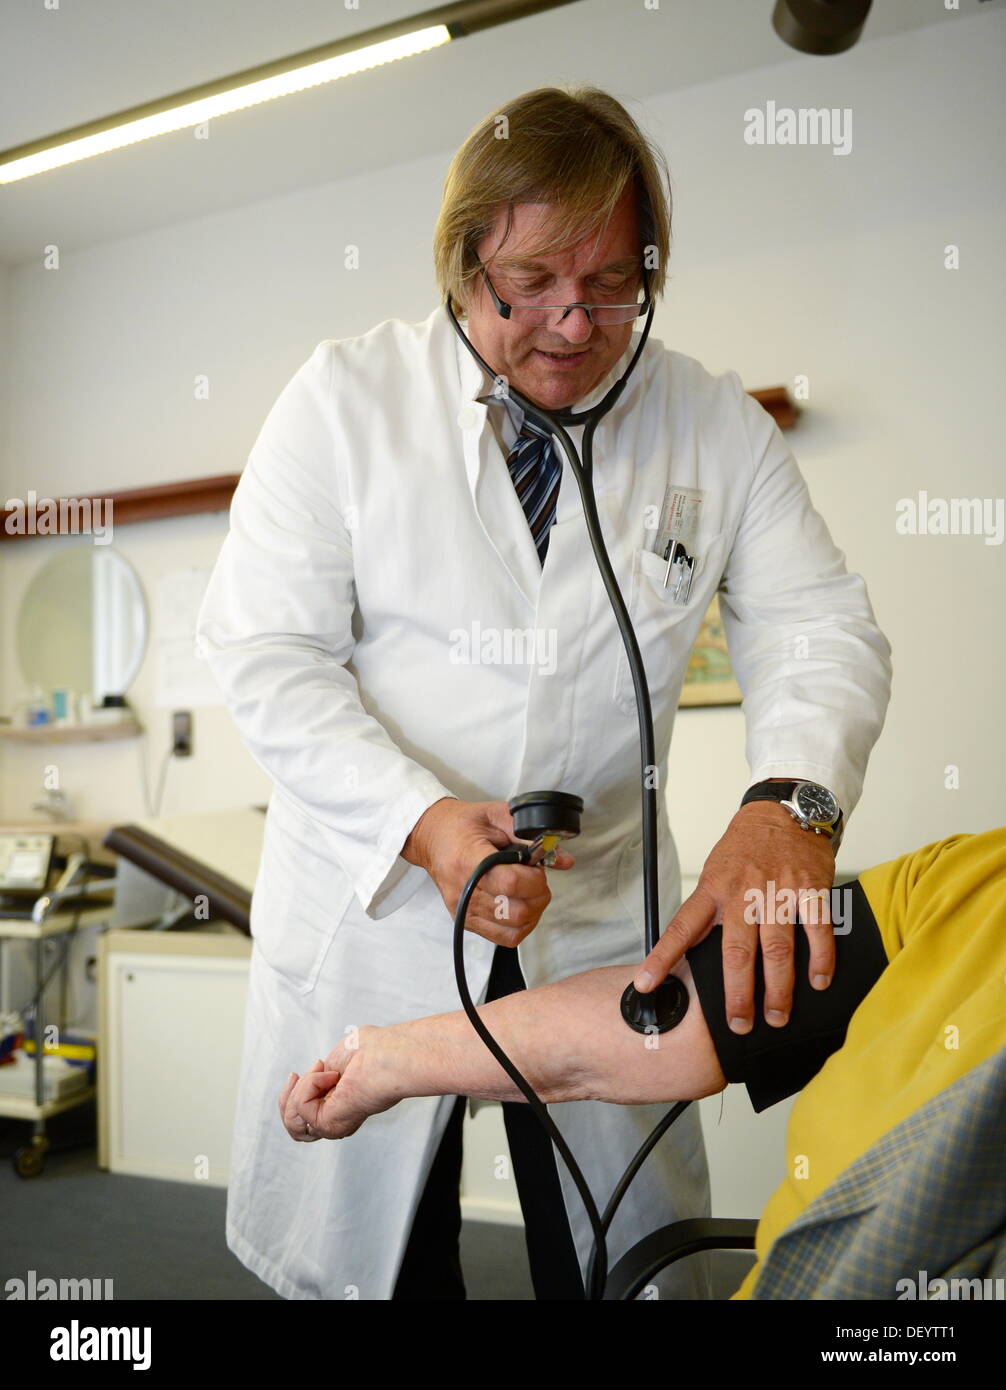 General practitioner Markus Klett examines a patient in his practice in Stuttgart, Germany, 18 September 2013. On 19 September 2014 the National Association of Statutory Health Insurance Physicians Baden-Wuerttemberg informs citizens on the supply of general practitioners in German regions with a press conference. Photo. Bernd Weissbrod Stock Photo